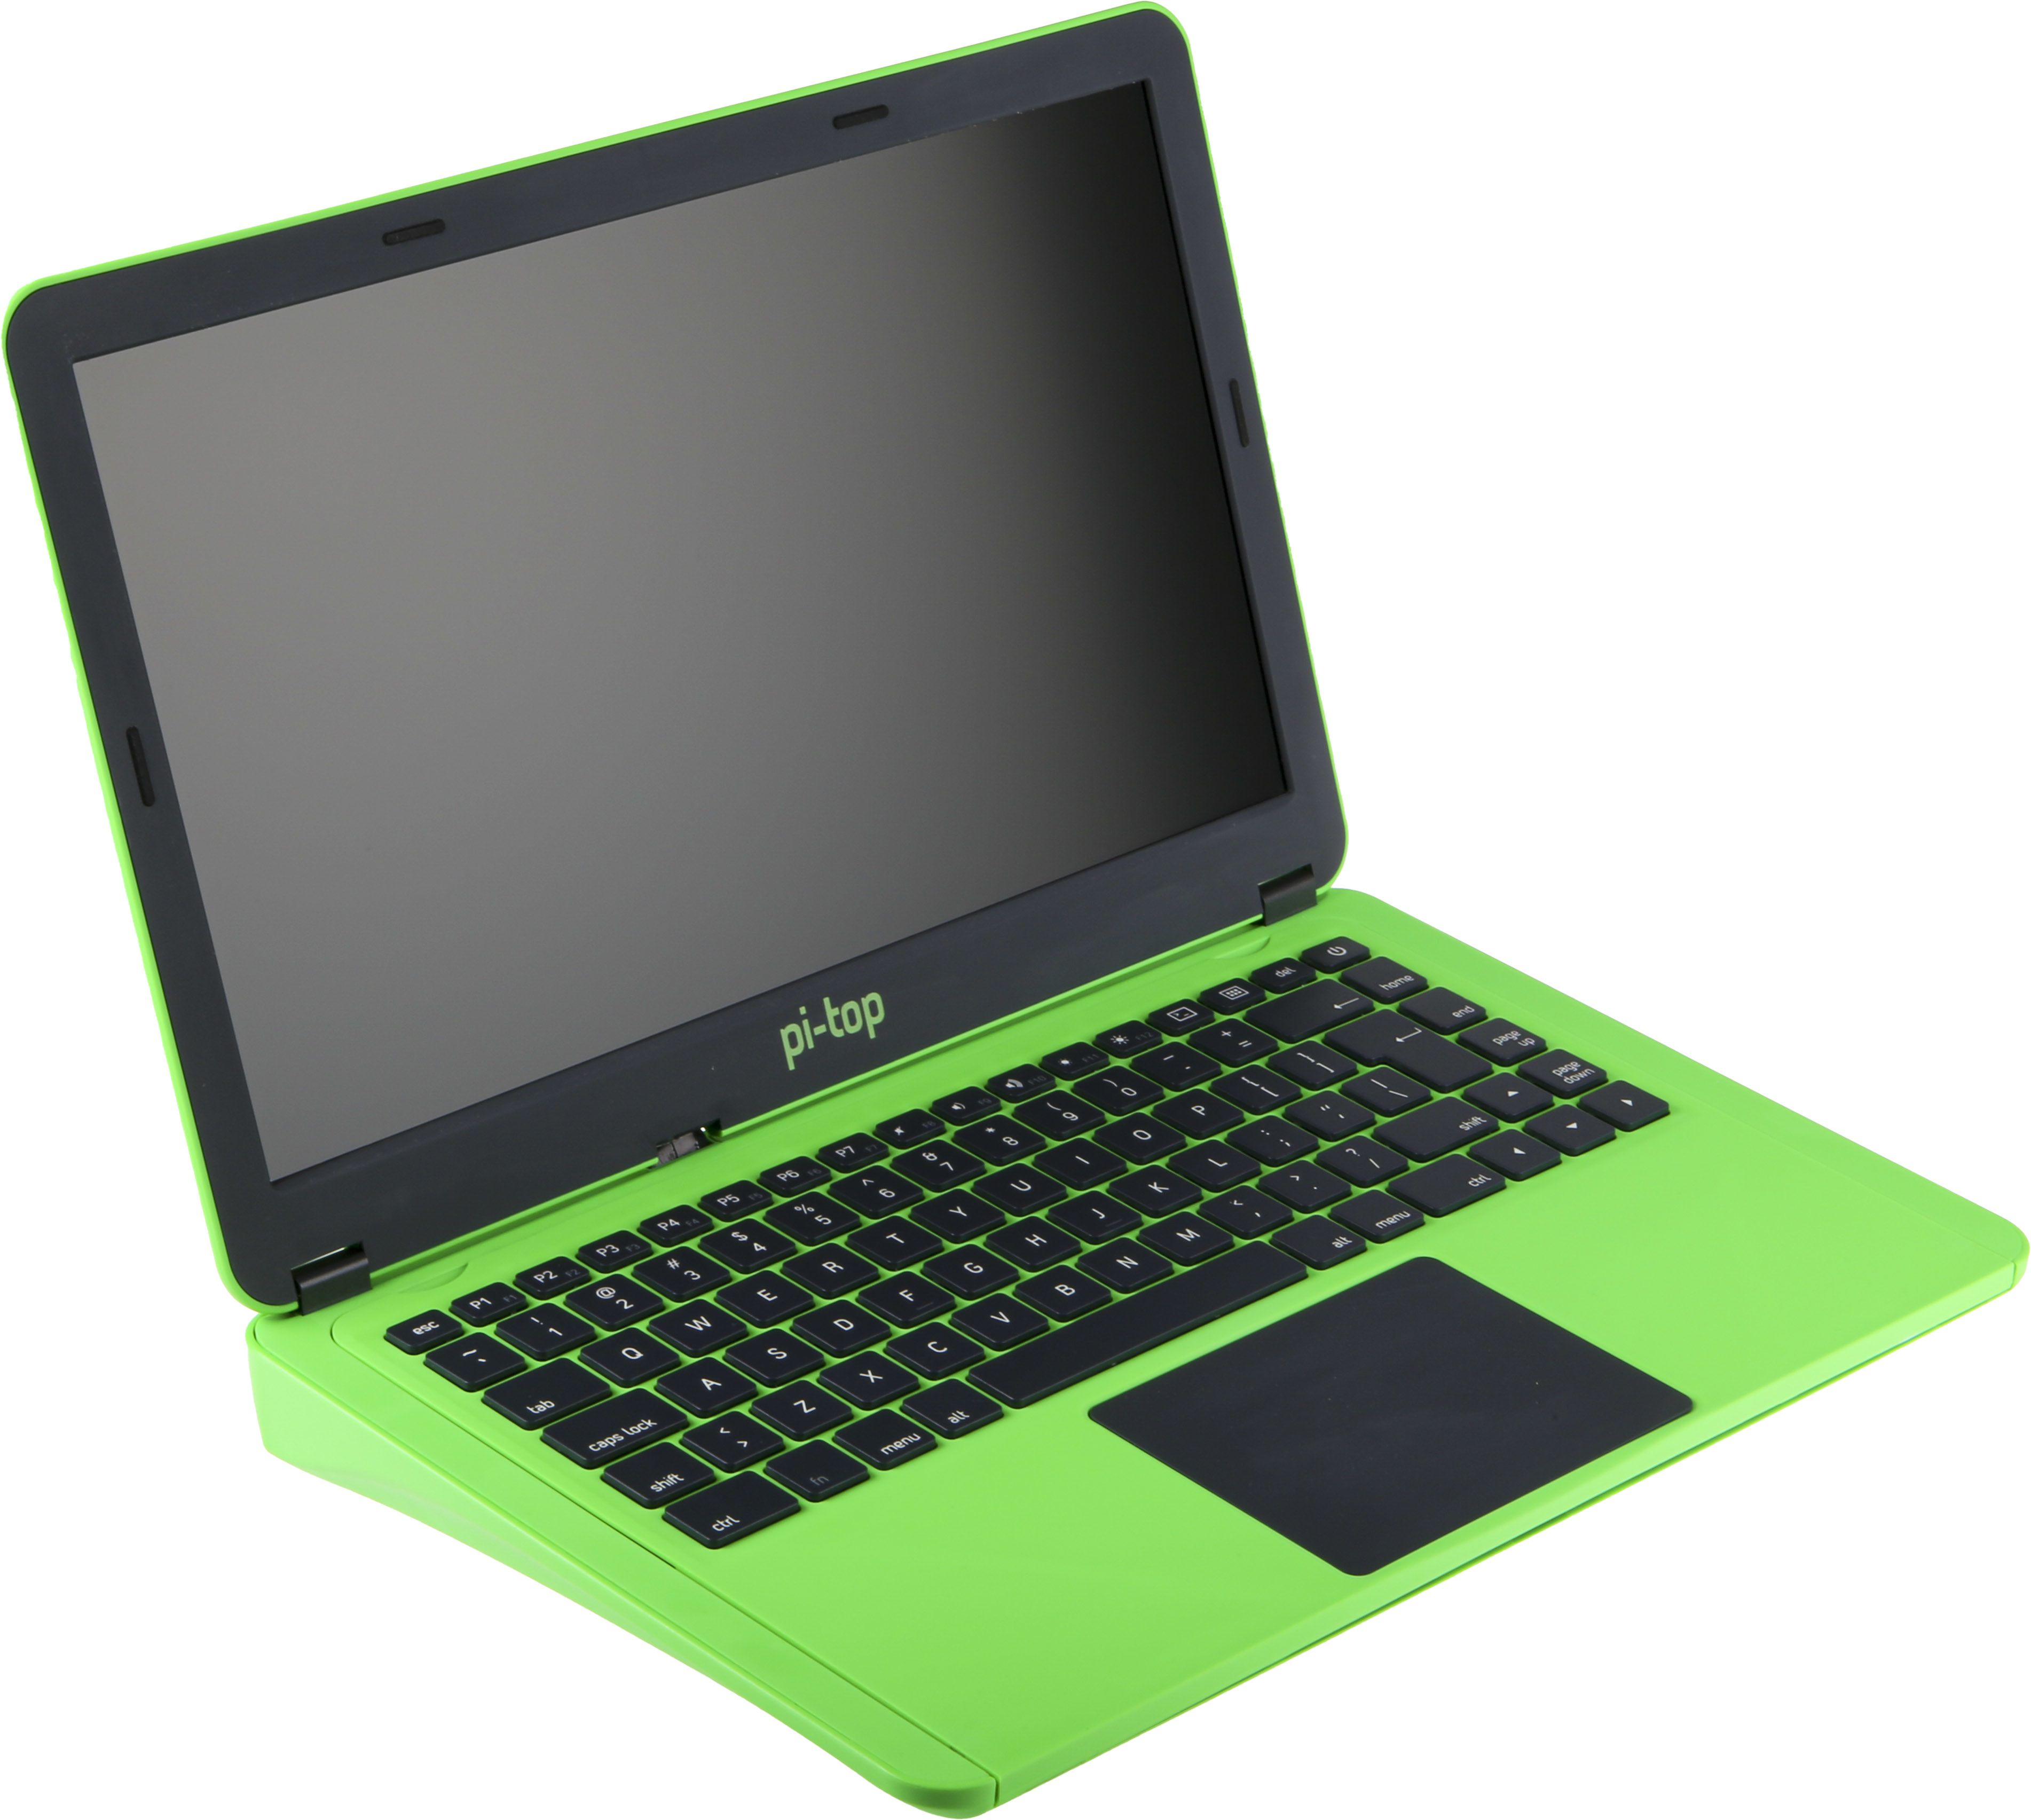 Pi-Top, LCD-Anzeige, 13.3Zoll, Laptop v2, Green with Inventors Kit